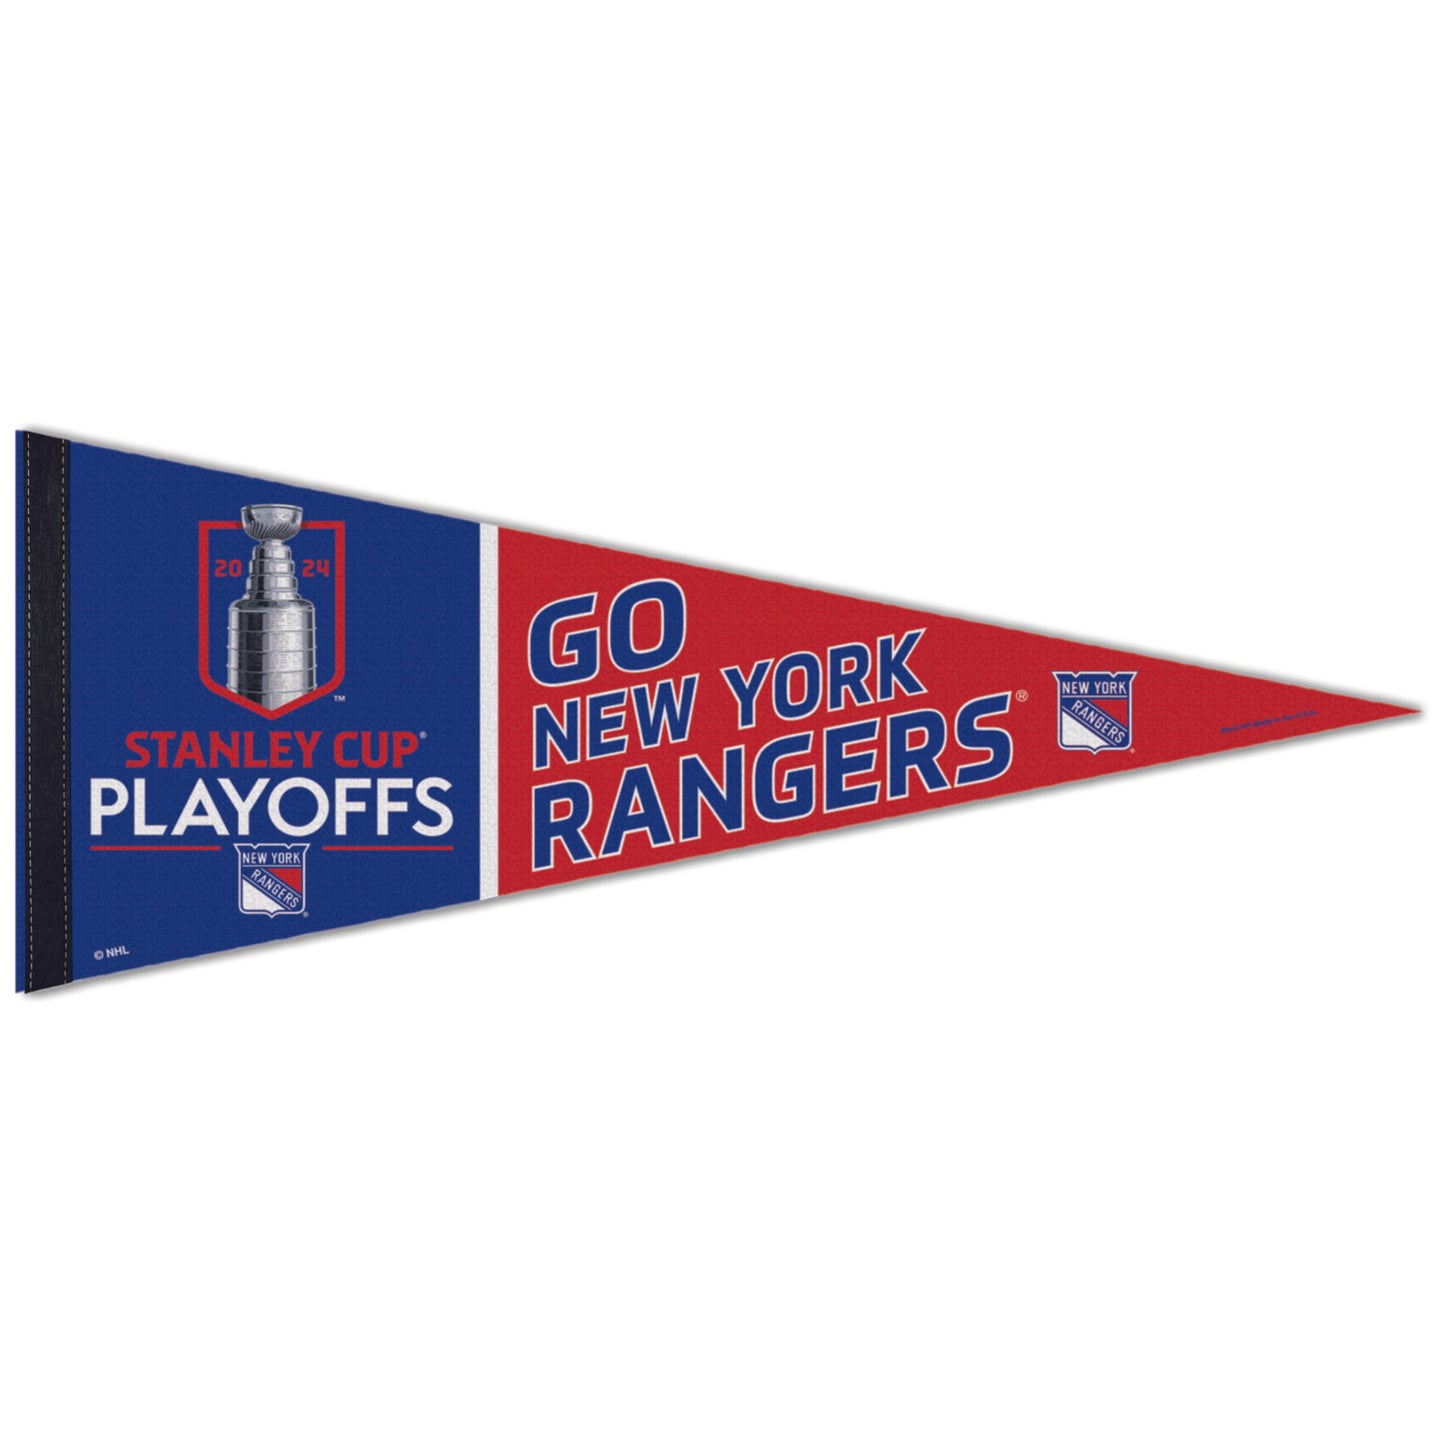 Wincraft Rangers 23-24 Playoff Participant Pennant